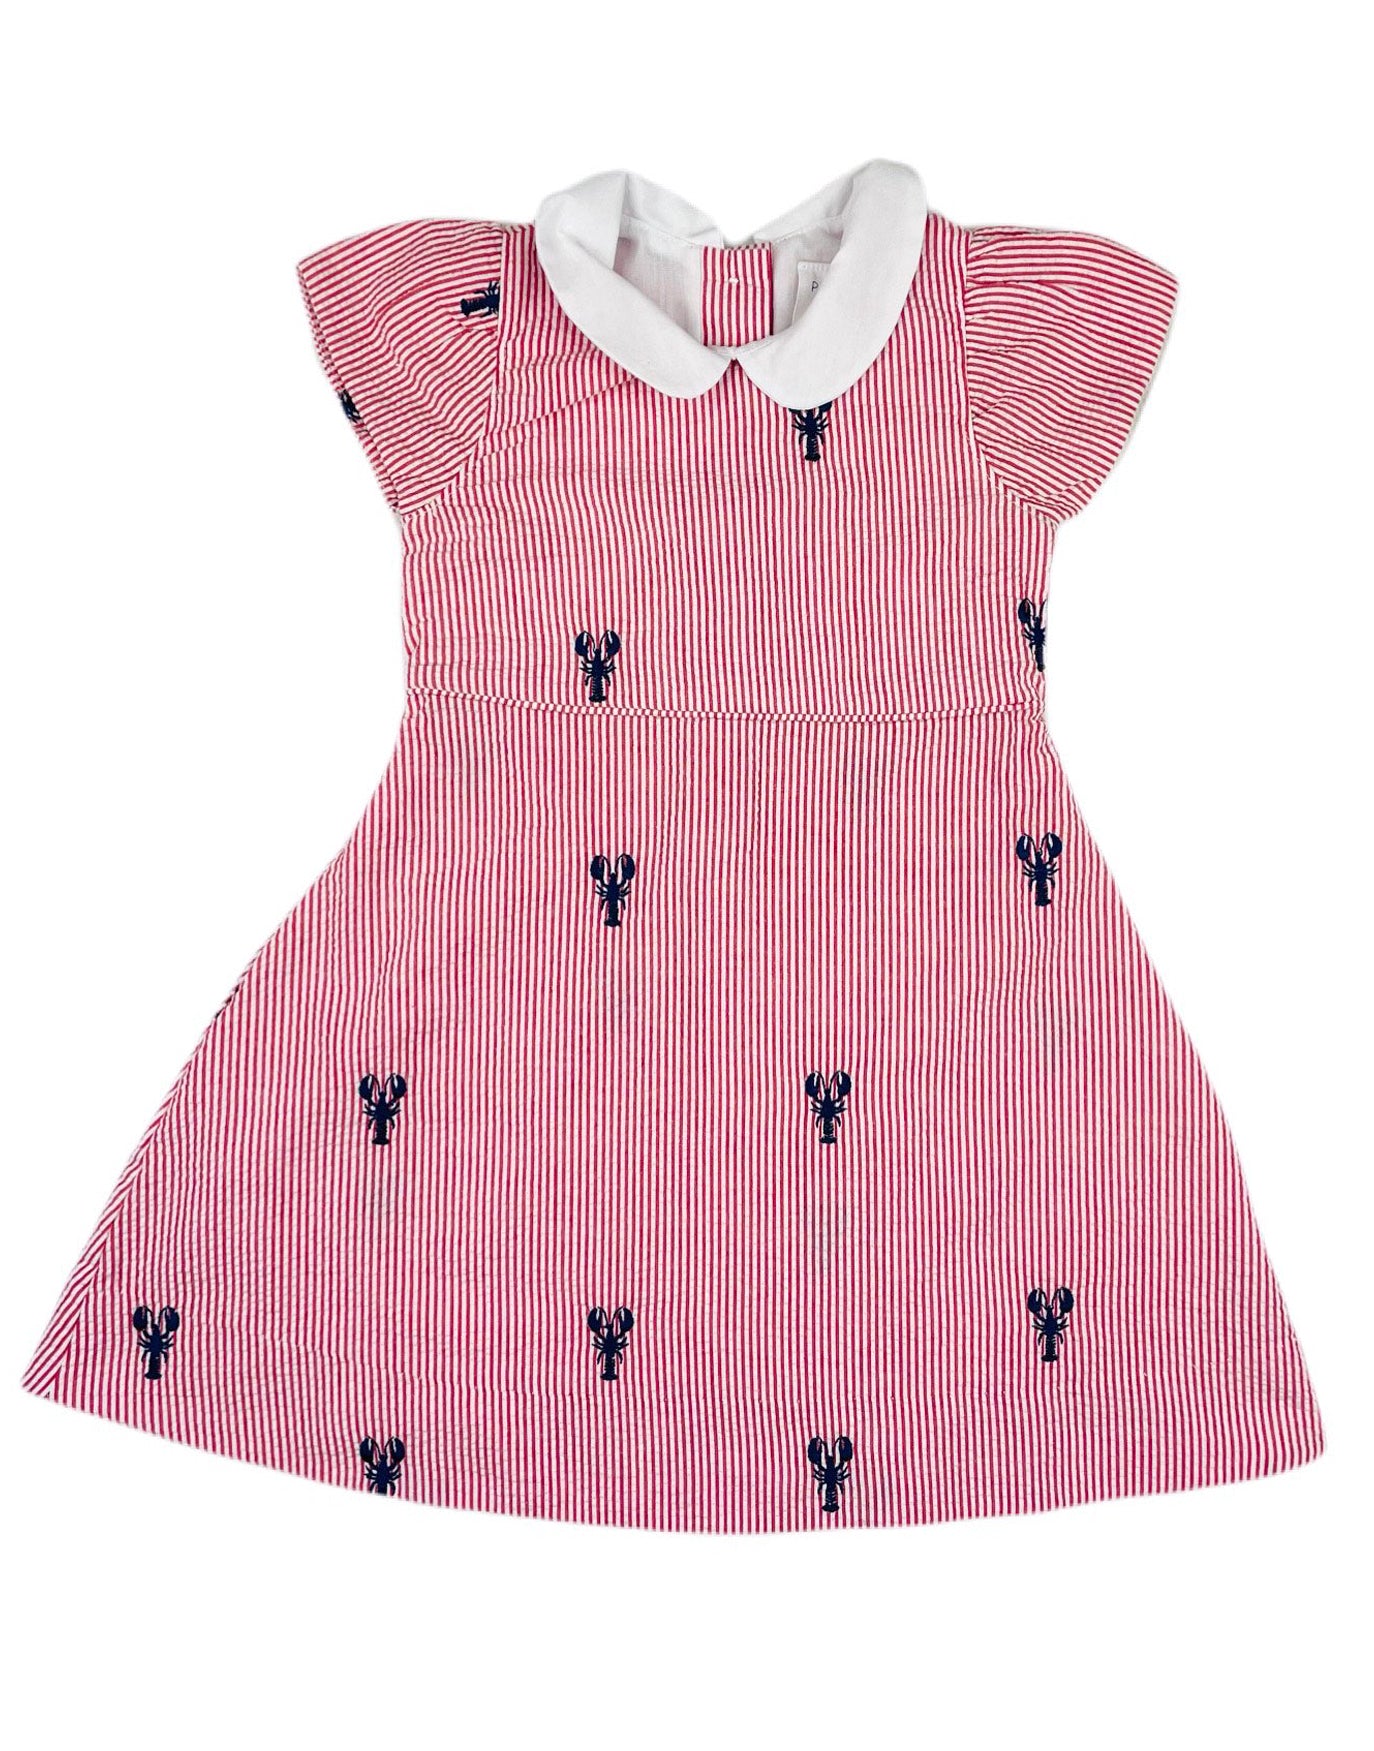 Red Seersucker Girls Dress with Navy Embroidered Lobsters and Peter Pan Collar